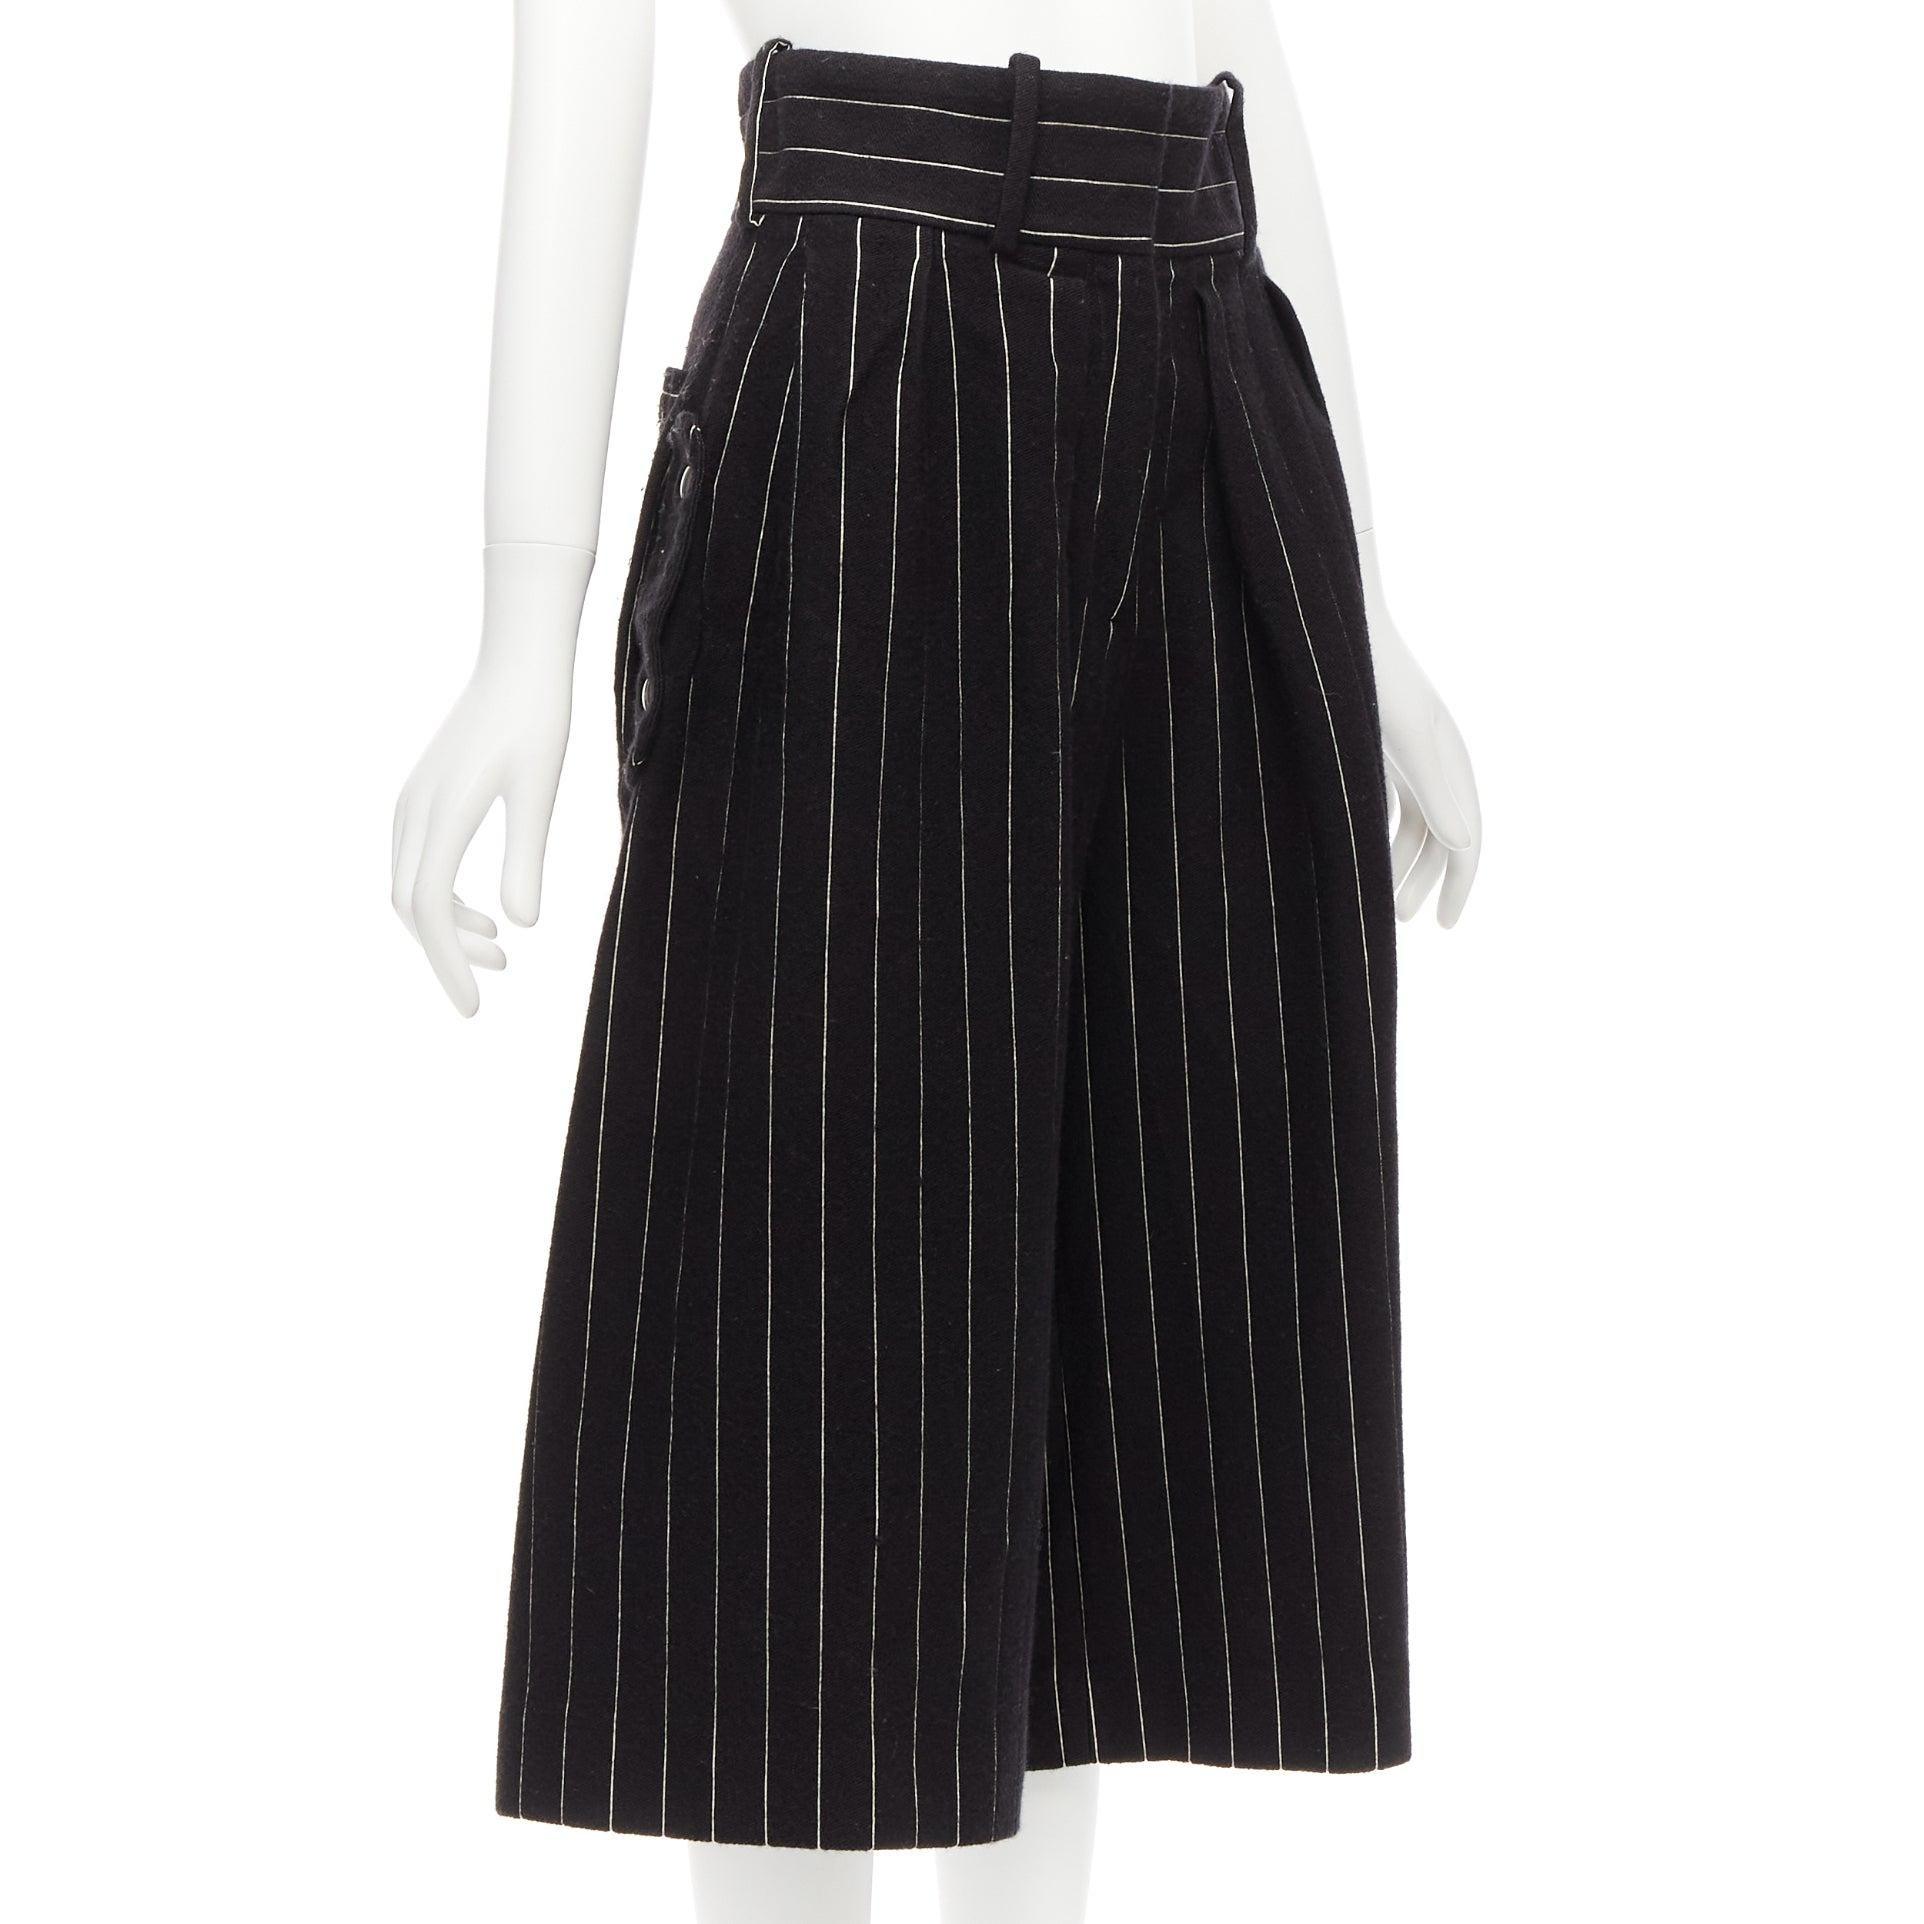 JW ANDERSON black white wool blend pinstripe wide leg culotte UK6 XS
Reference: JACG/A00101
Brand: JW Anderson
Material: Wool, Blend
Color: Black, White
Pattern: Pinstriped
Closure: Zip Fly
Extra Details: Pleated front and back. 2 Pockets at